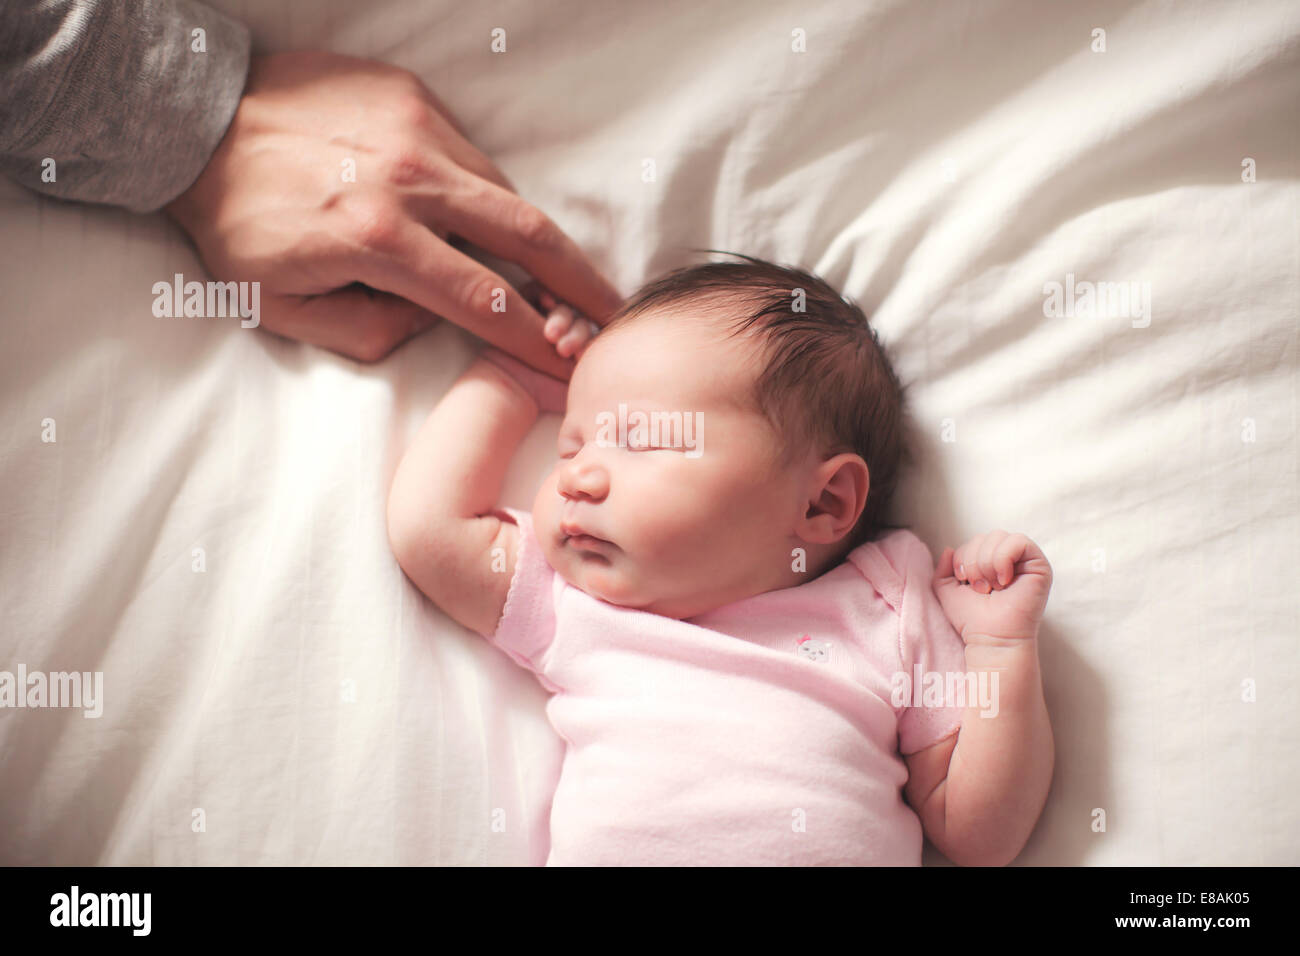 Baby girl sleeping, hands held by father Stock Photo